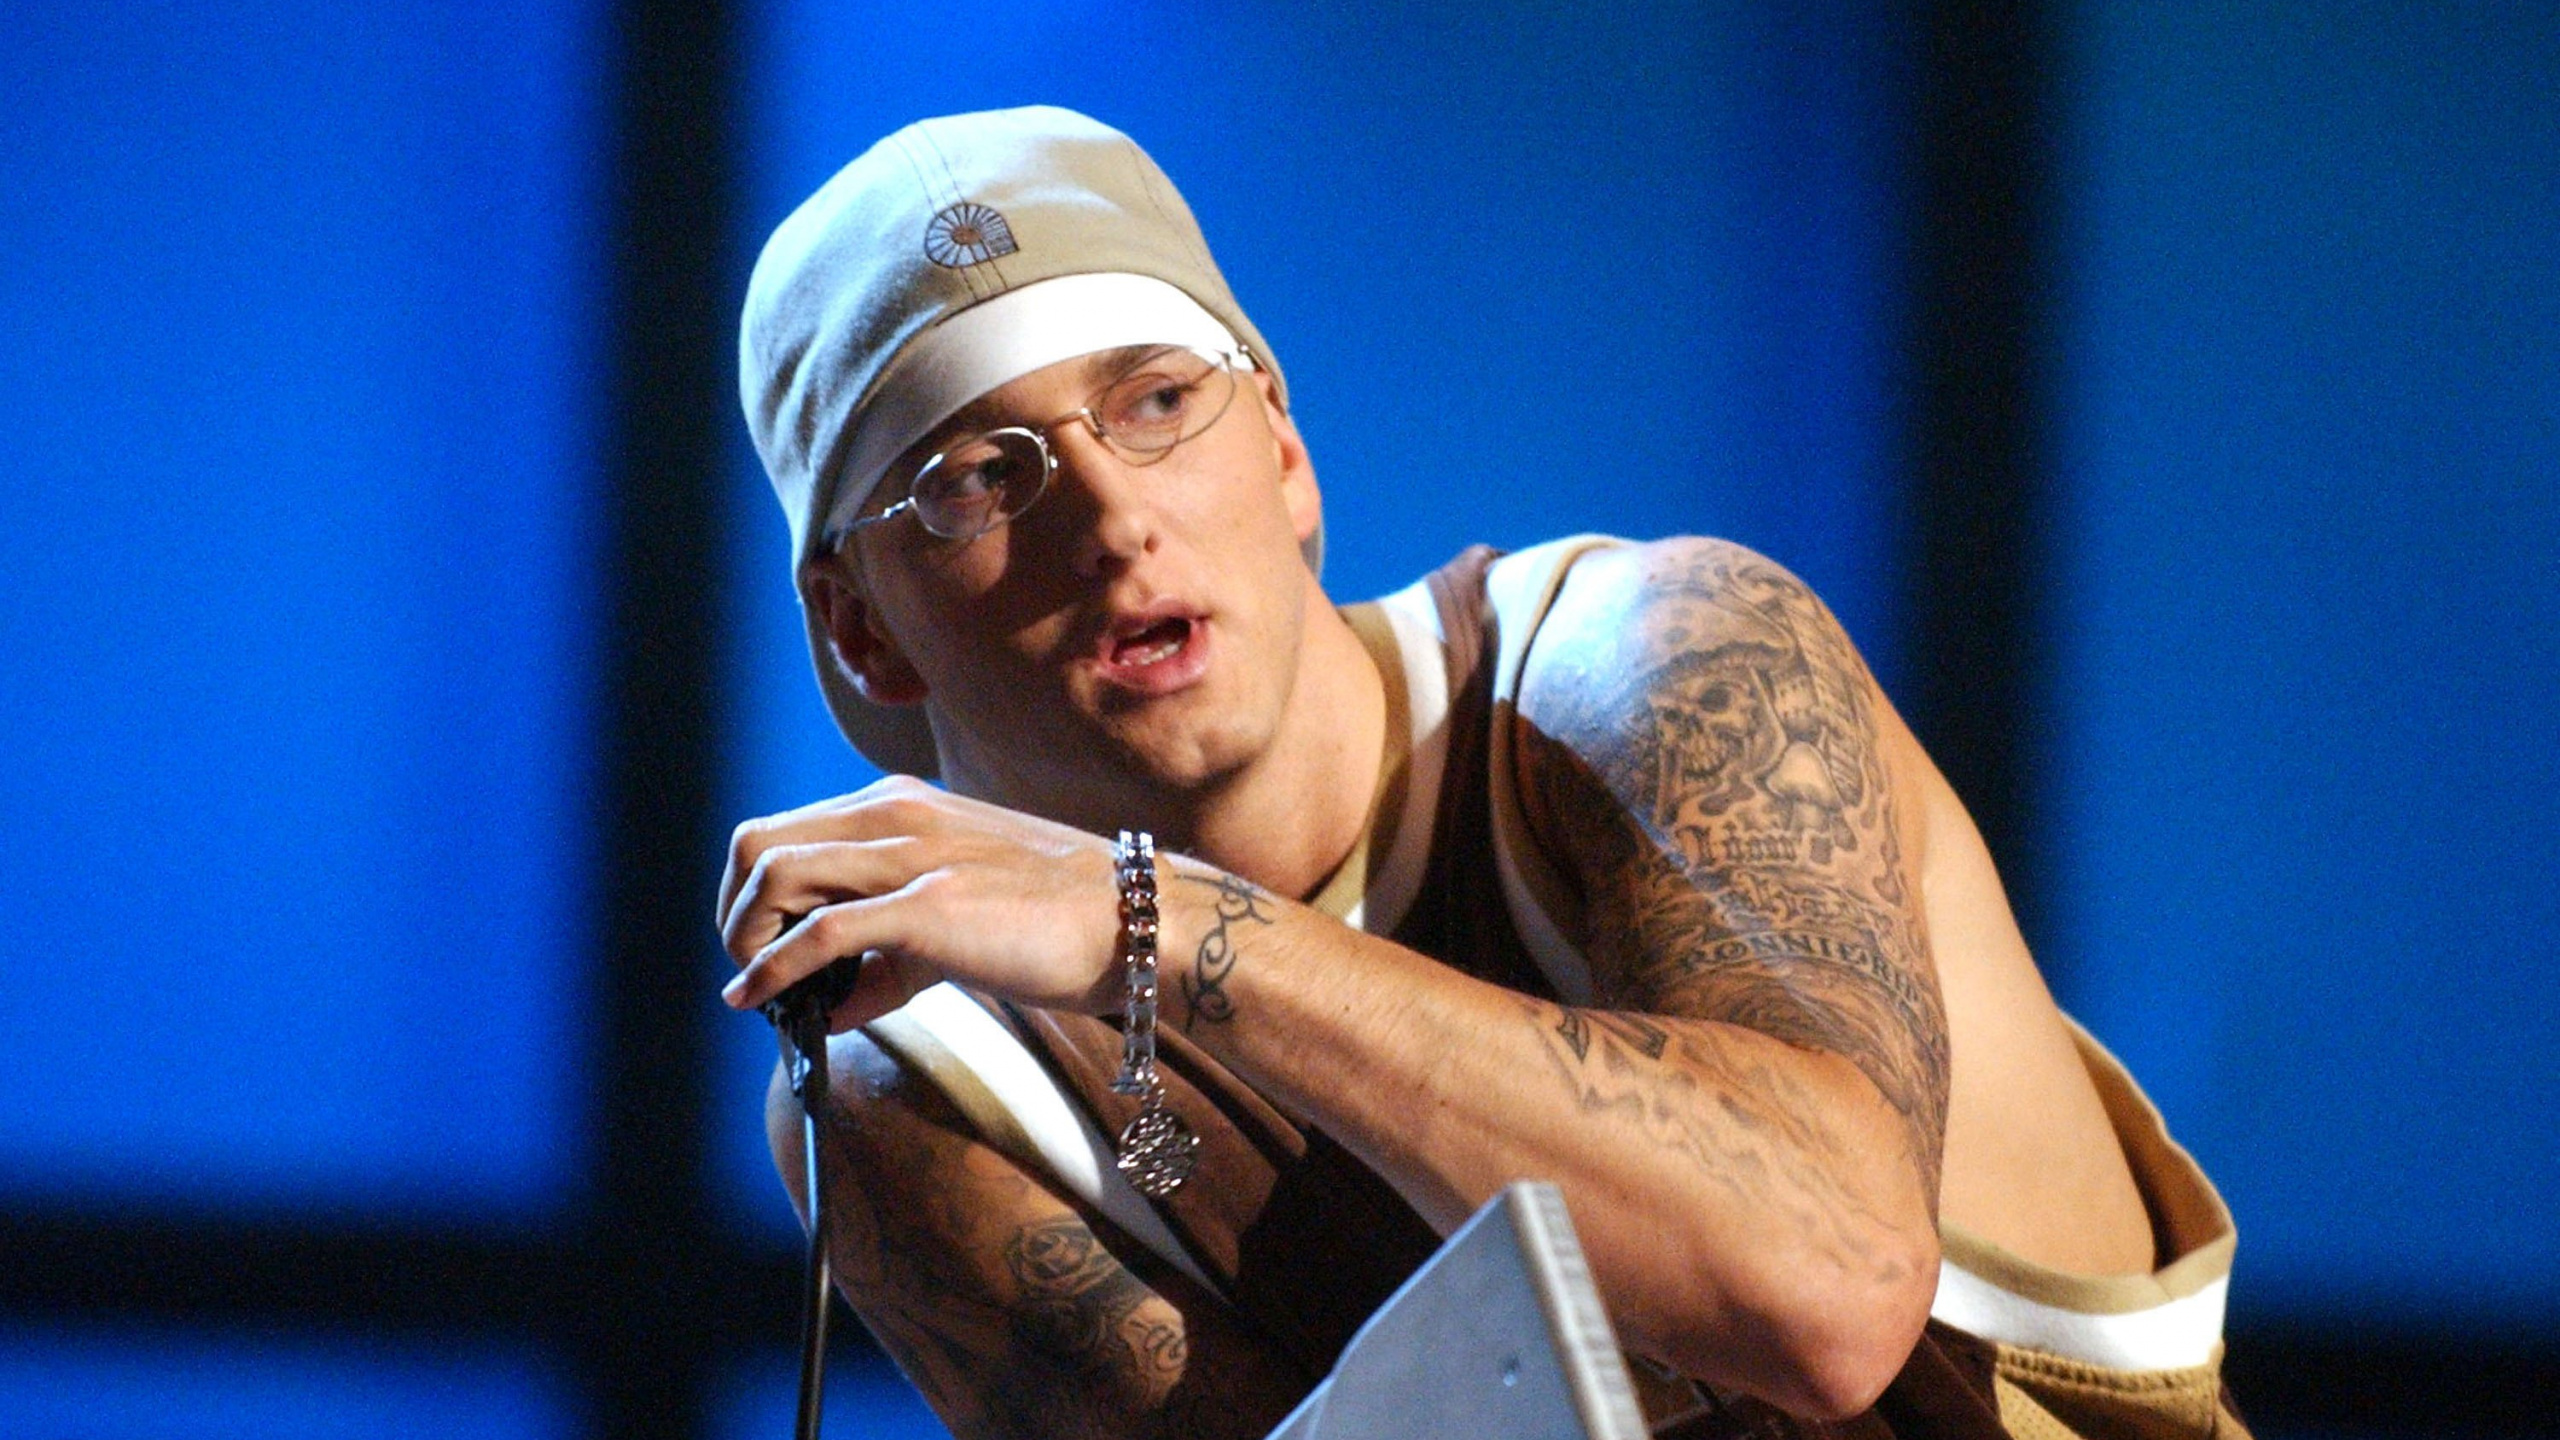 Eminem, Arm, Performance, Music, Muscle. Wallpaper in 2560x1440 Resolution